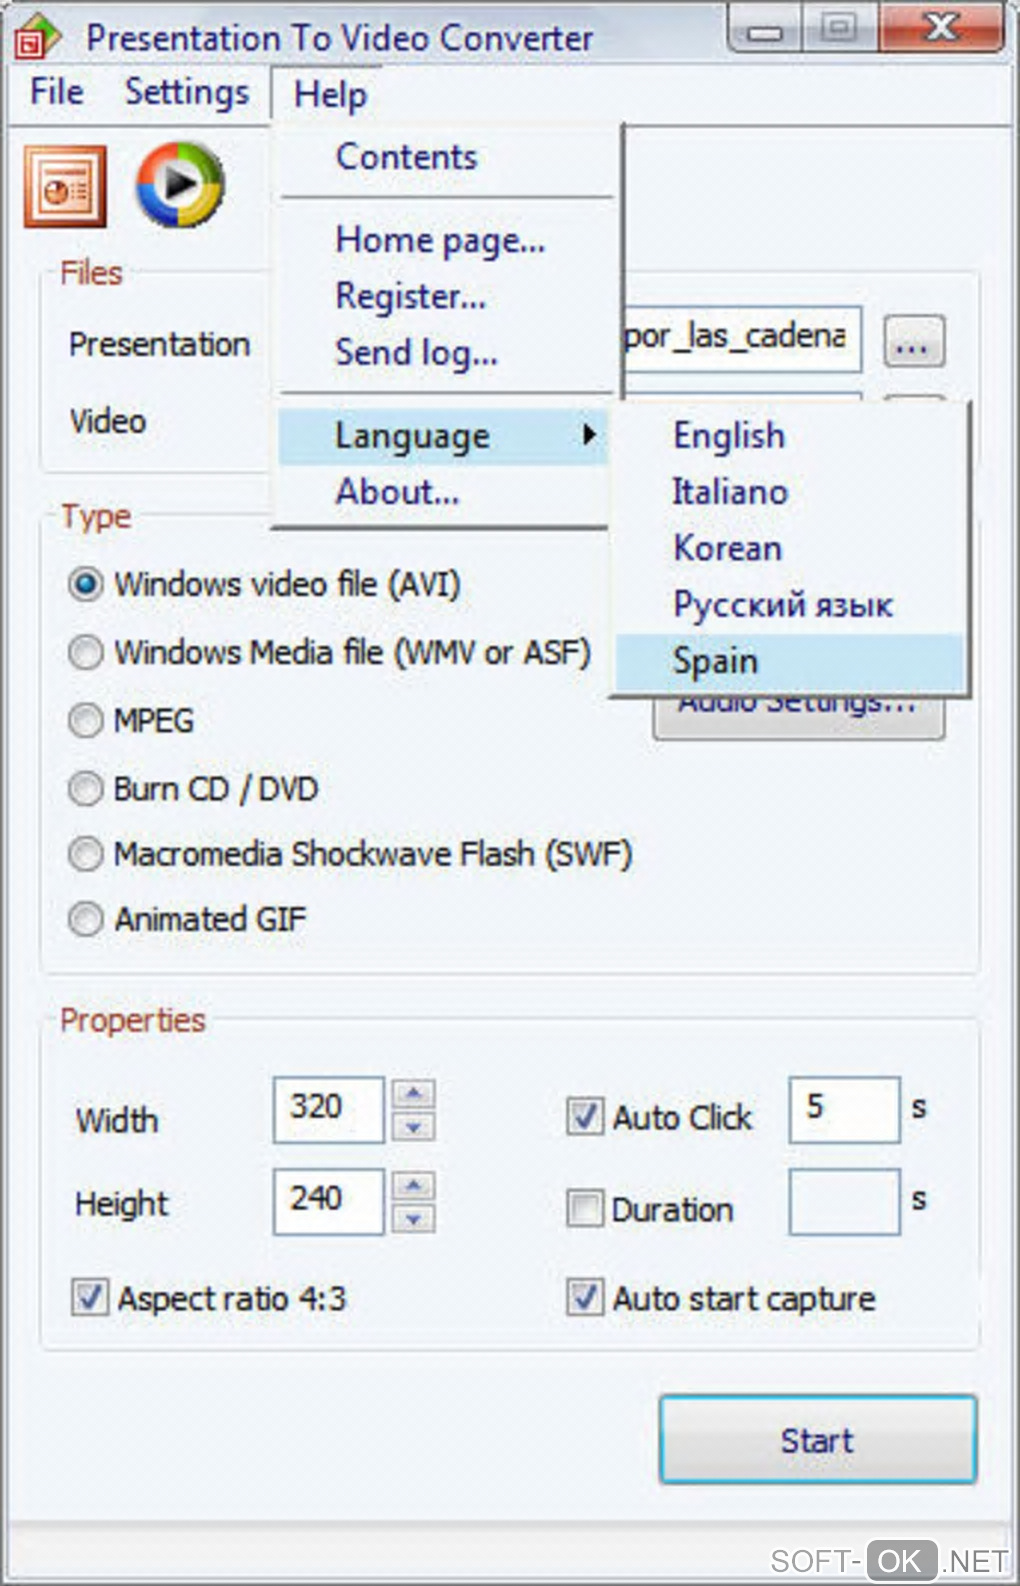 The appearance "Presentation to Video Converter"